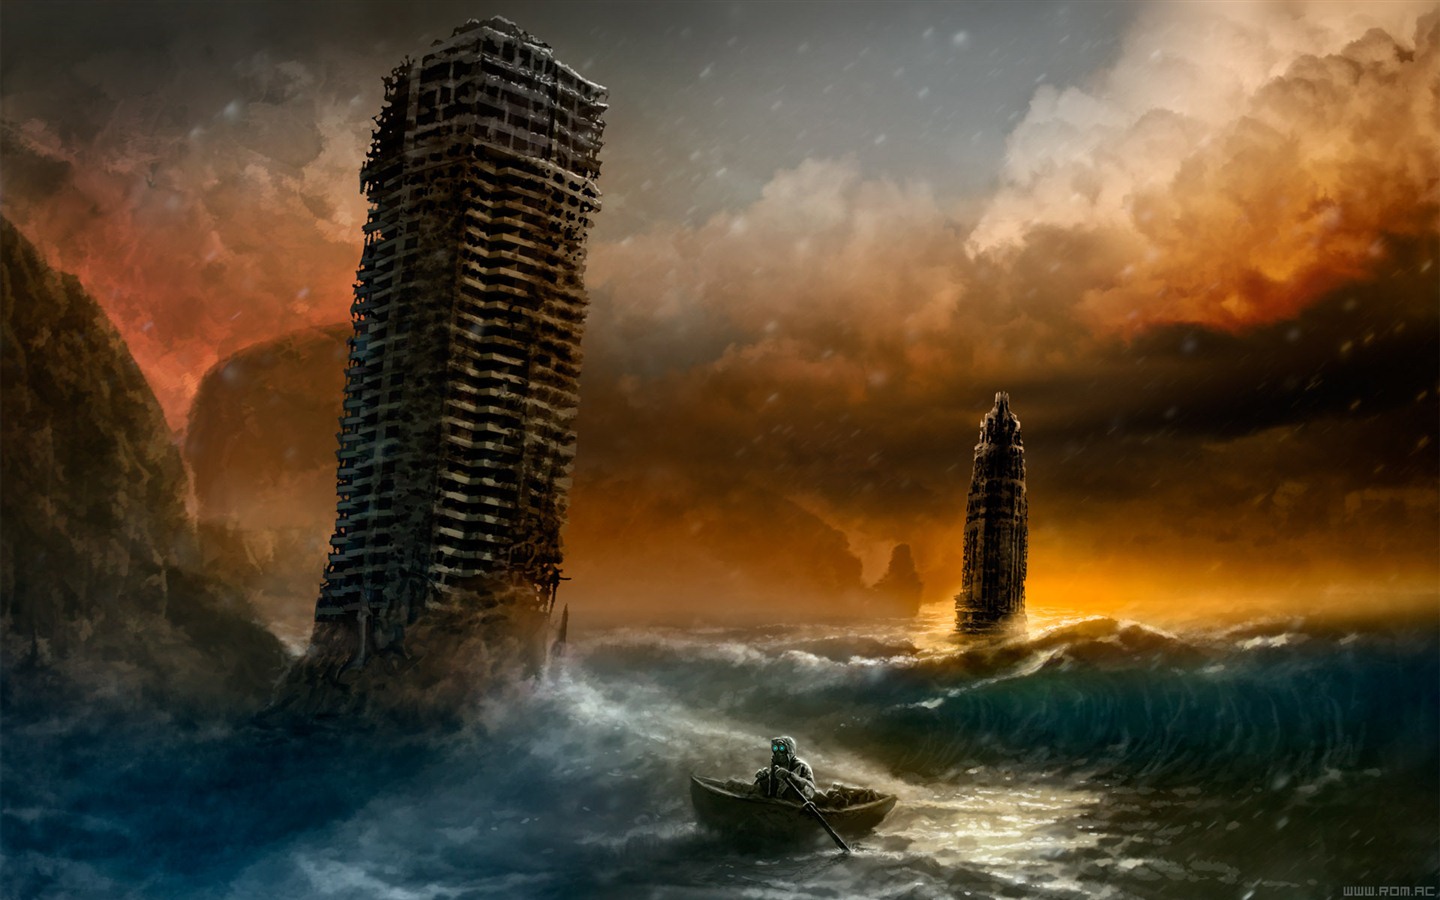 Romantically Apocalyptic creative painting wallpapers (1) #8 - 1440x900